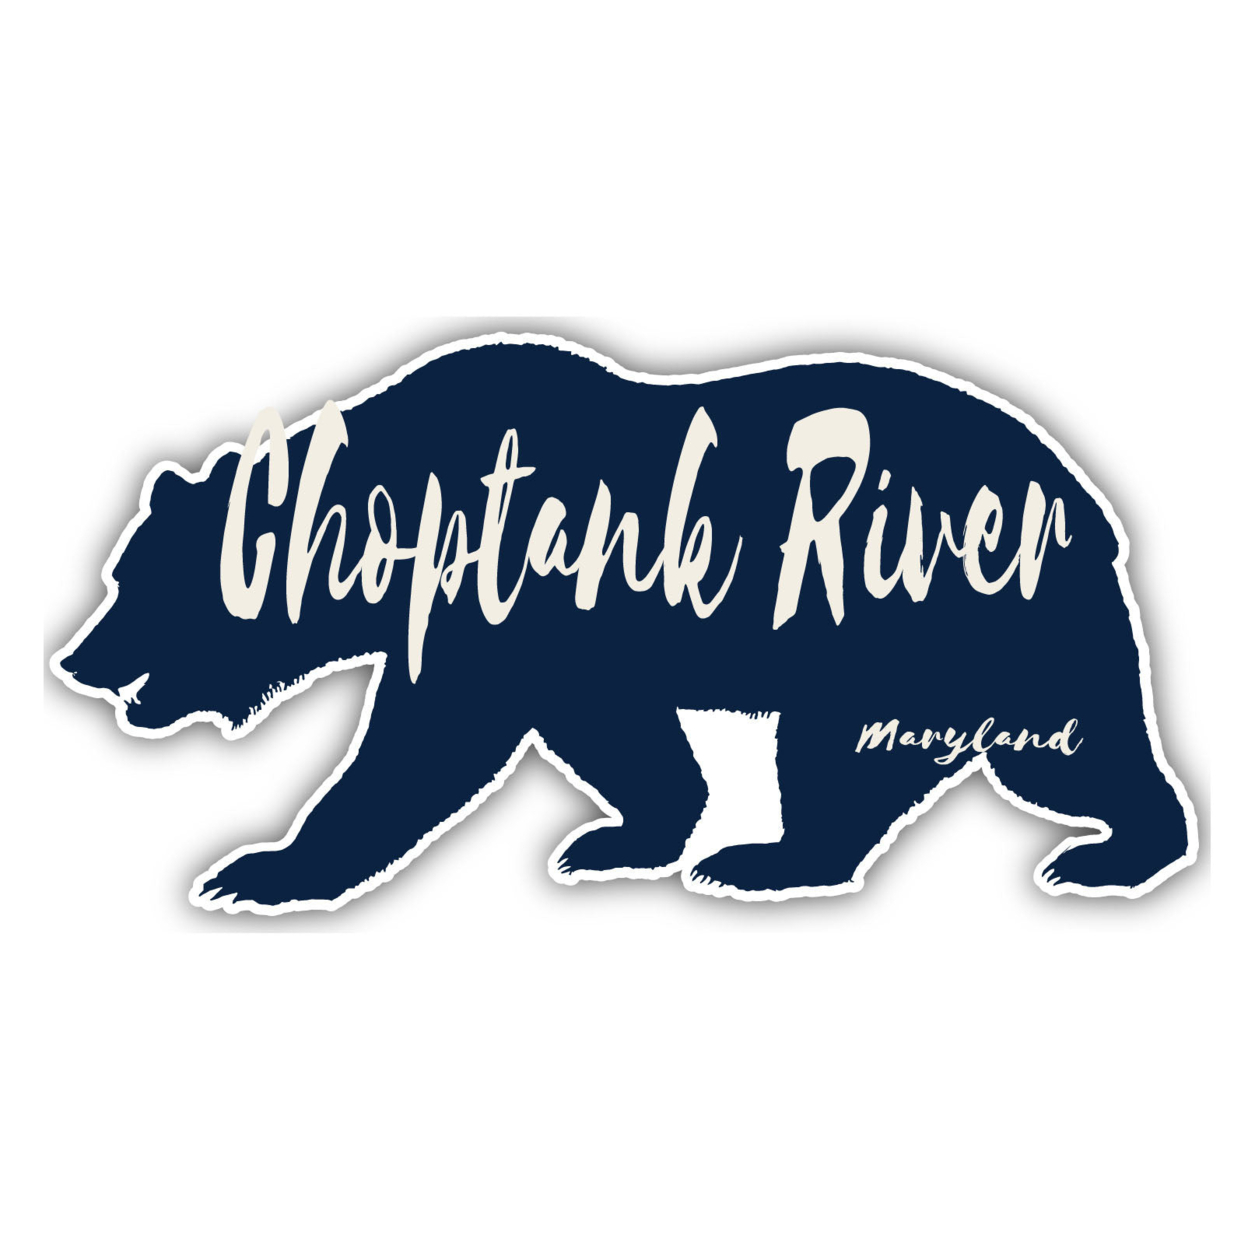 Choptank River Maryland Souvenir Decorative Stickers (Choose Theme And Size) - 4-Pack, 12-Inch, Bear